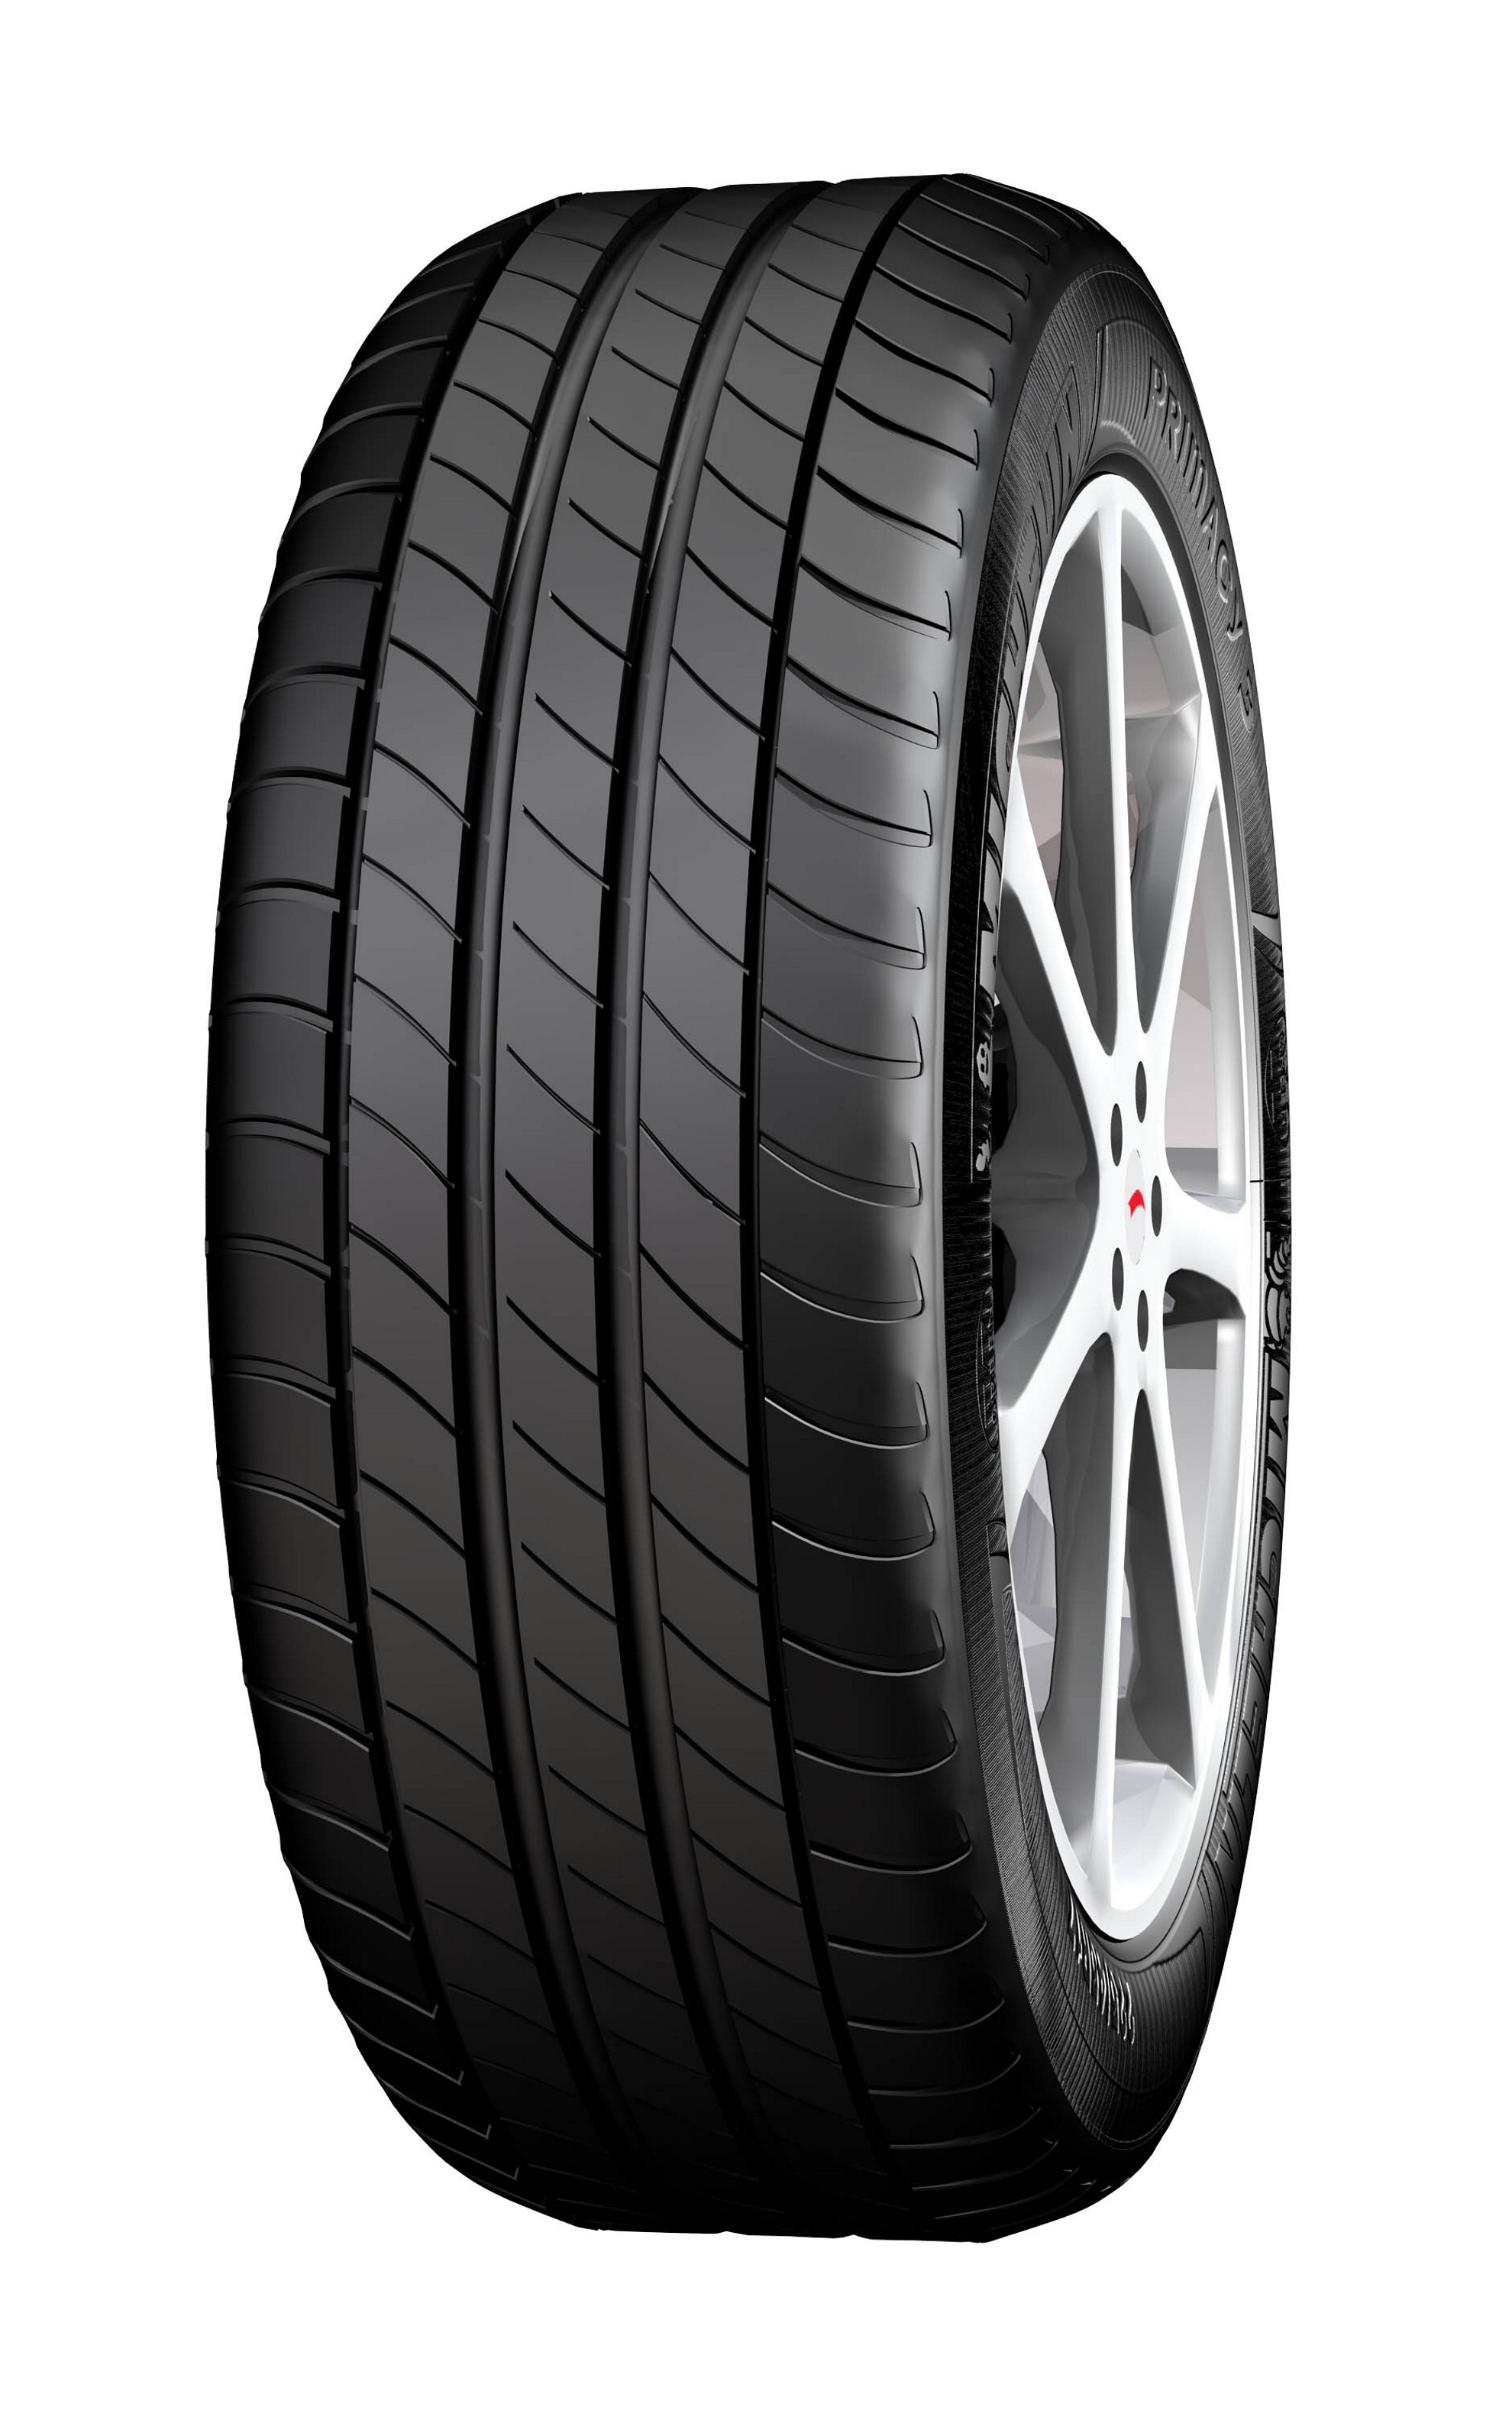 Buy Two Or More Michelin Primacy 3 Tyres & Get Free BibAssist